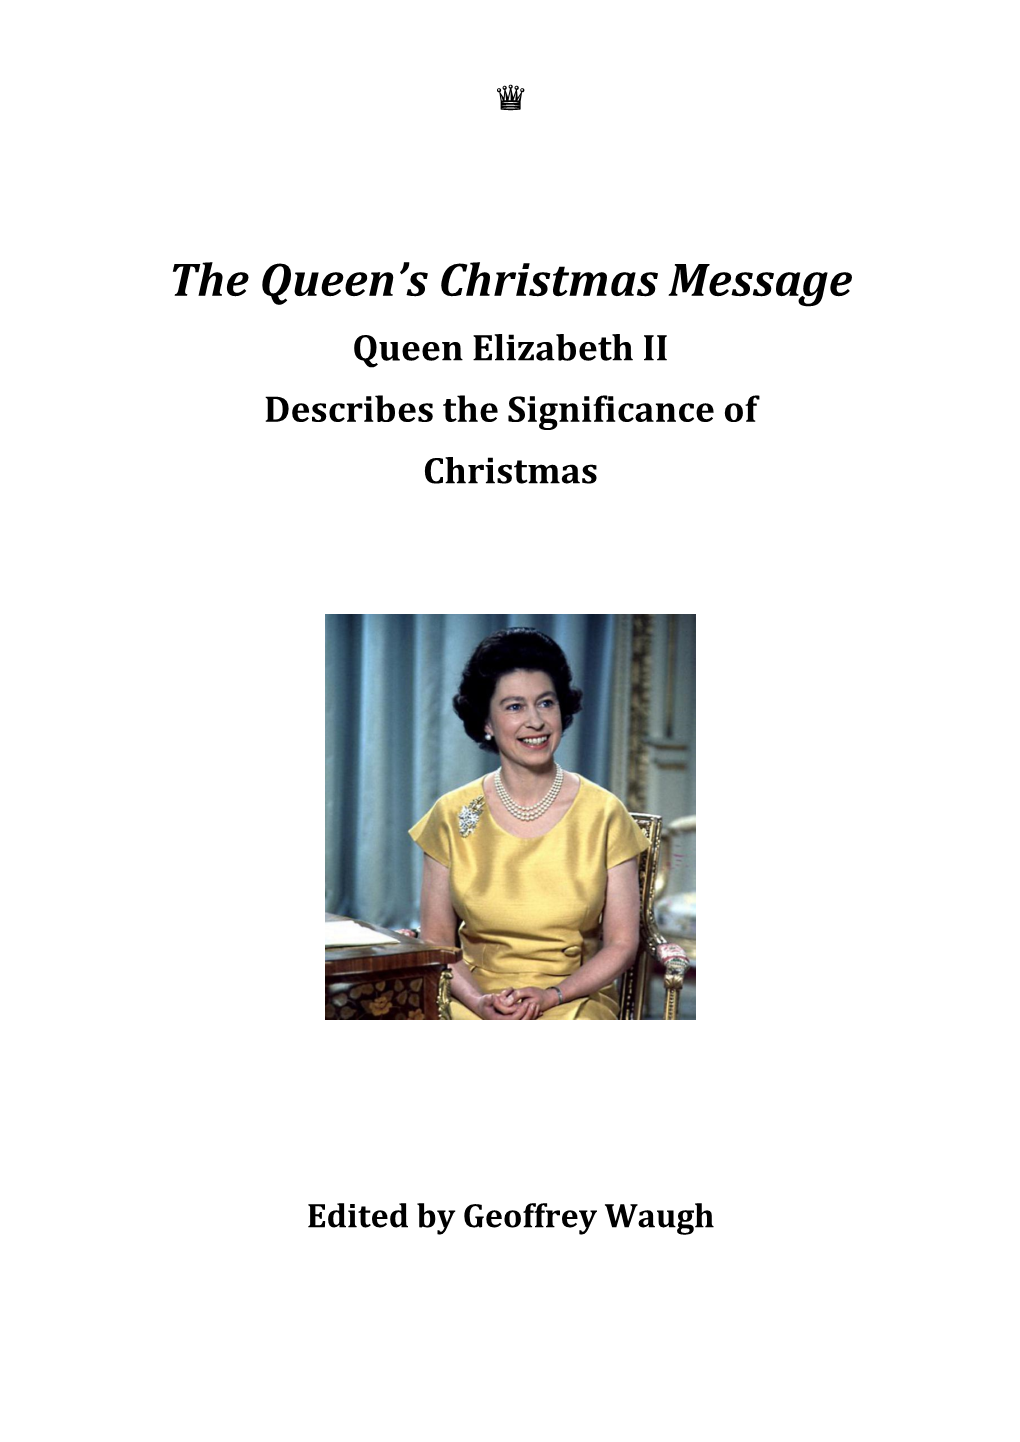 The Queen's Christmas Messages